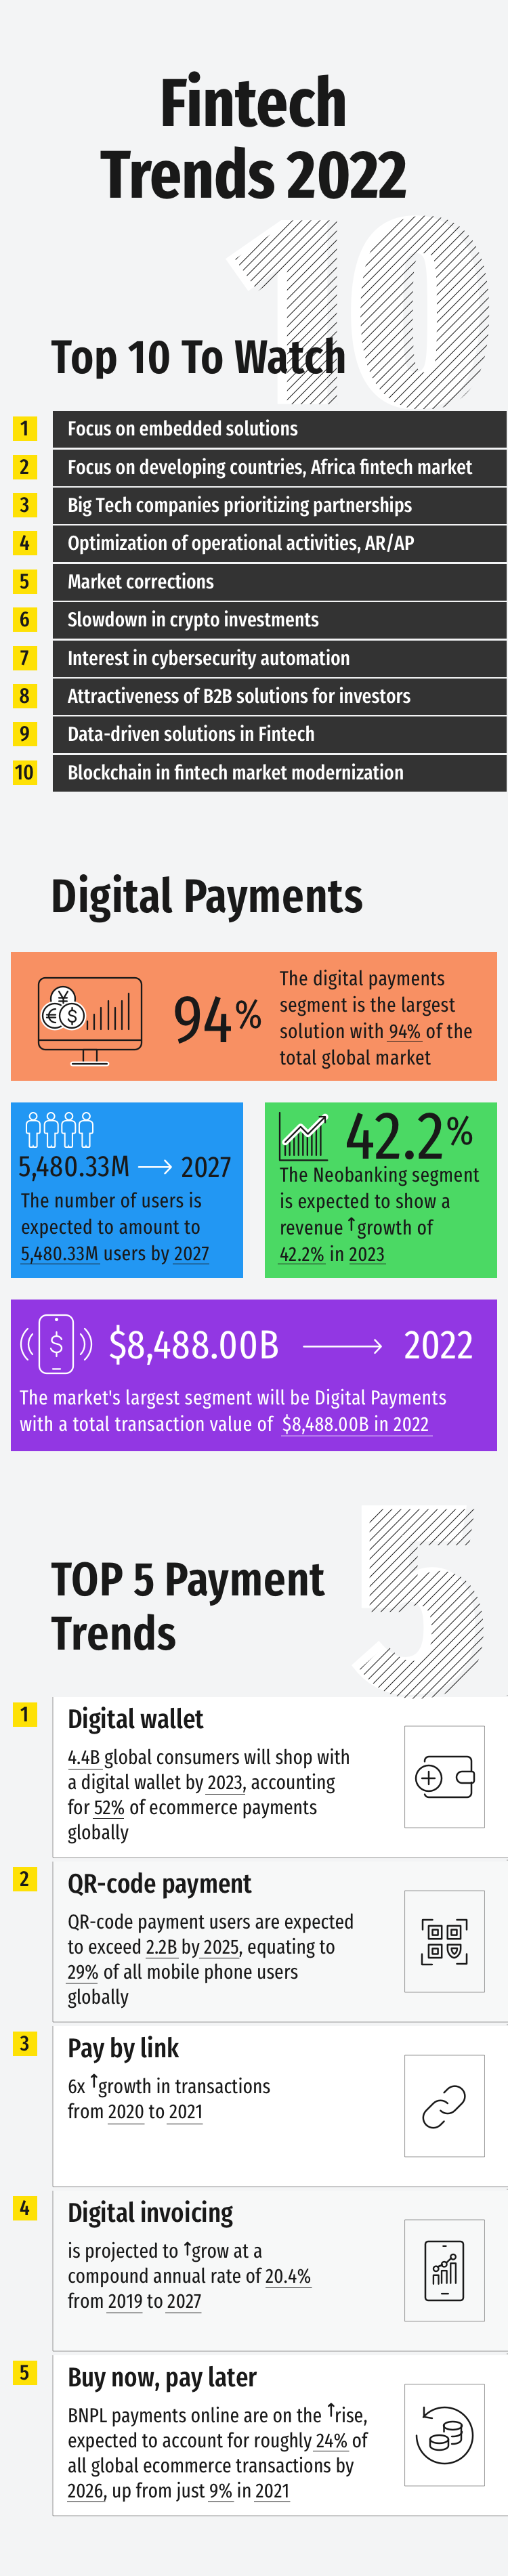 Infographic: Fintech Overview & Trends 2022 - 2024 - 19